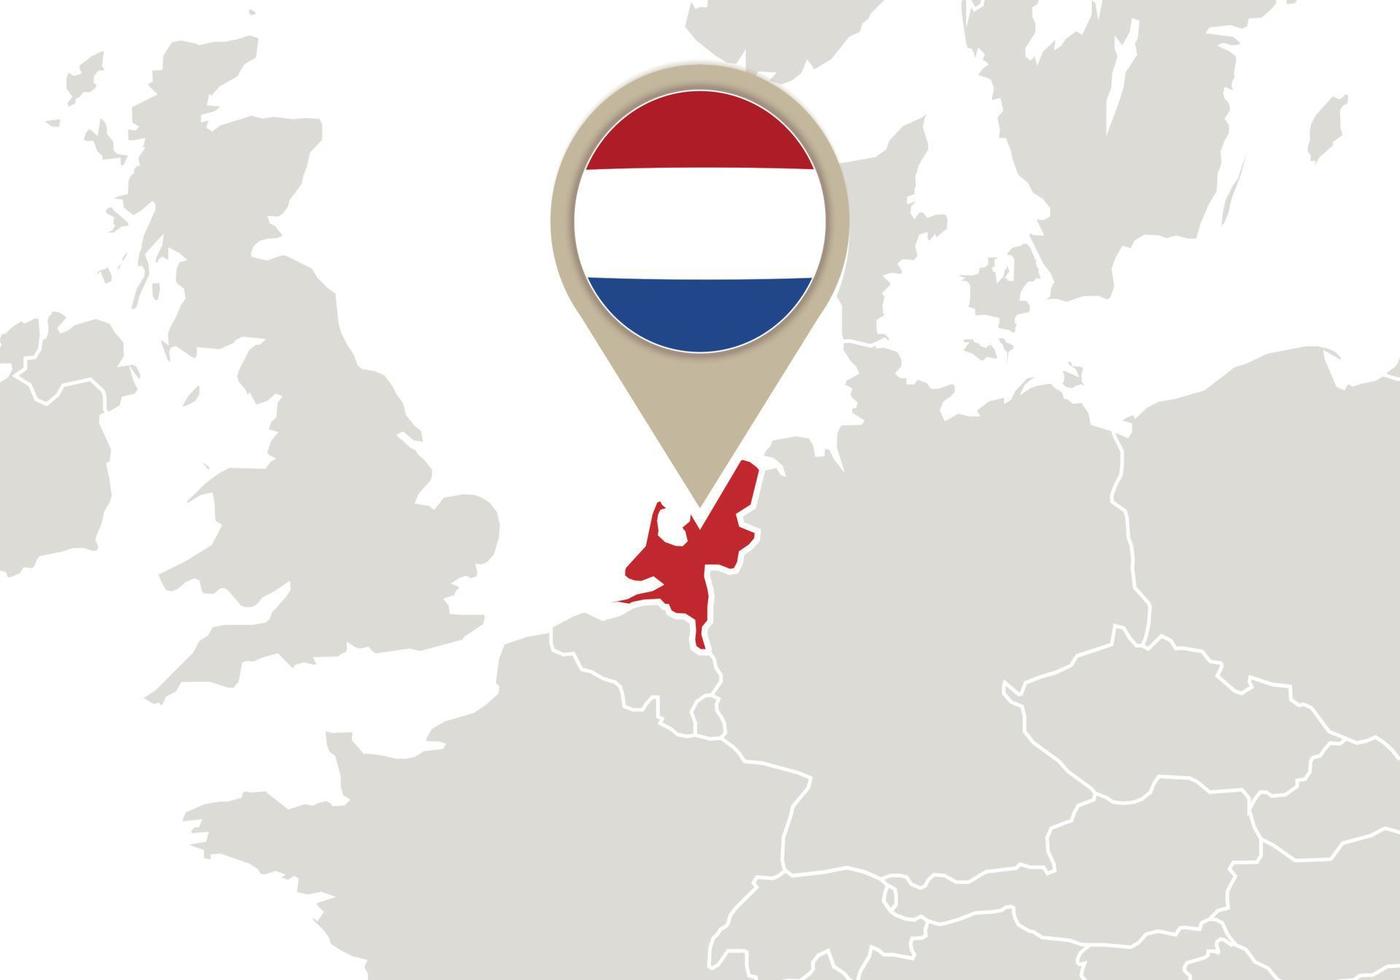 Netherlands on Europe map vector